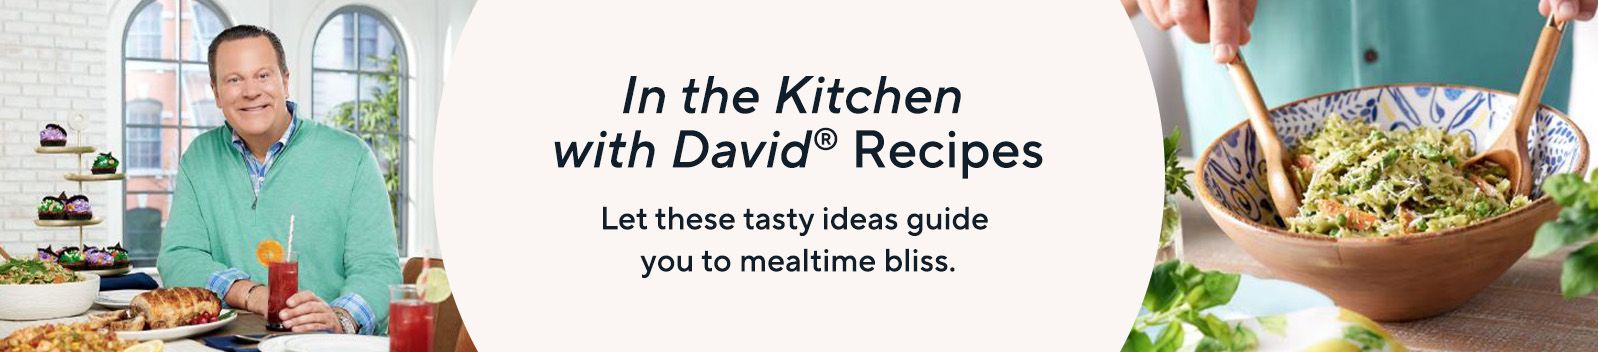 In the Kitchen with David® Recipes:  Let these tasty ideas guide you to mealtime bliss.